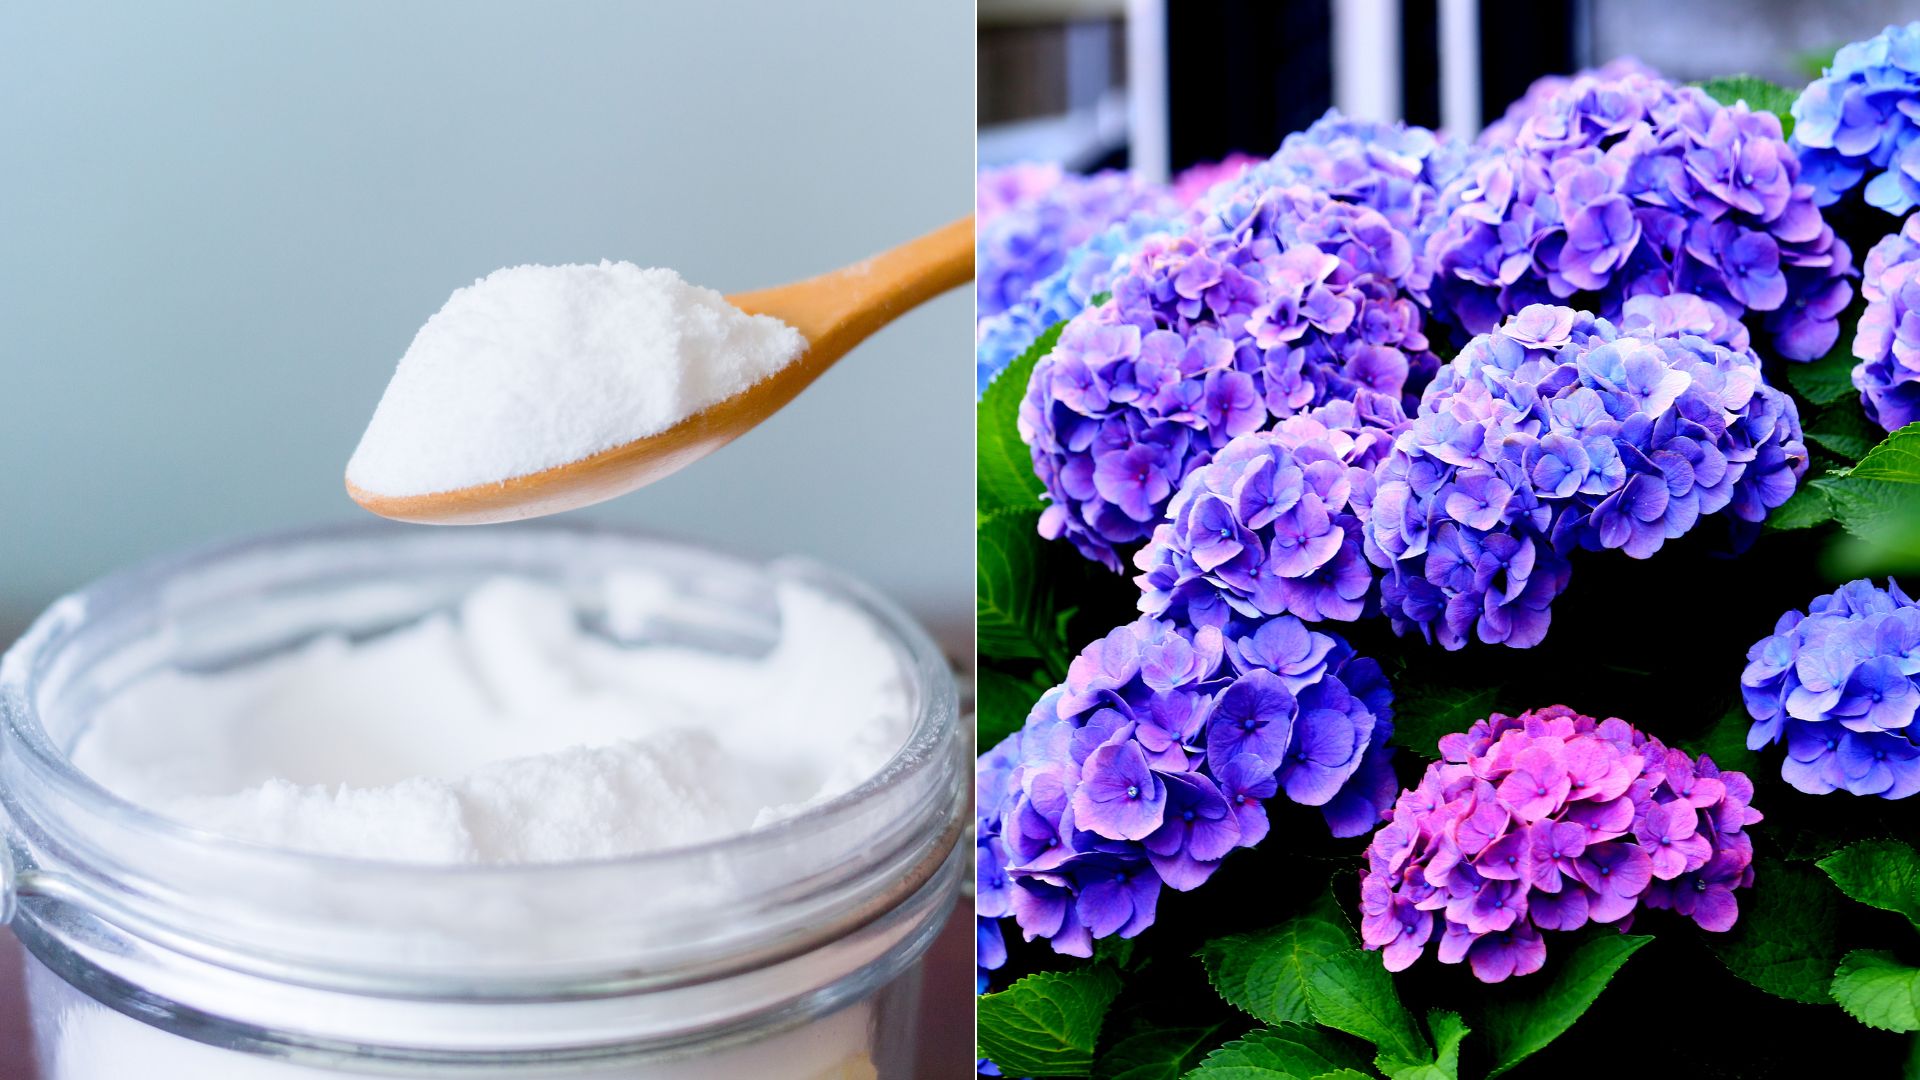 Is Baking Soda Really A Good Choice For Your Hydrangeas?